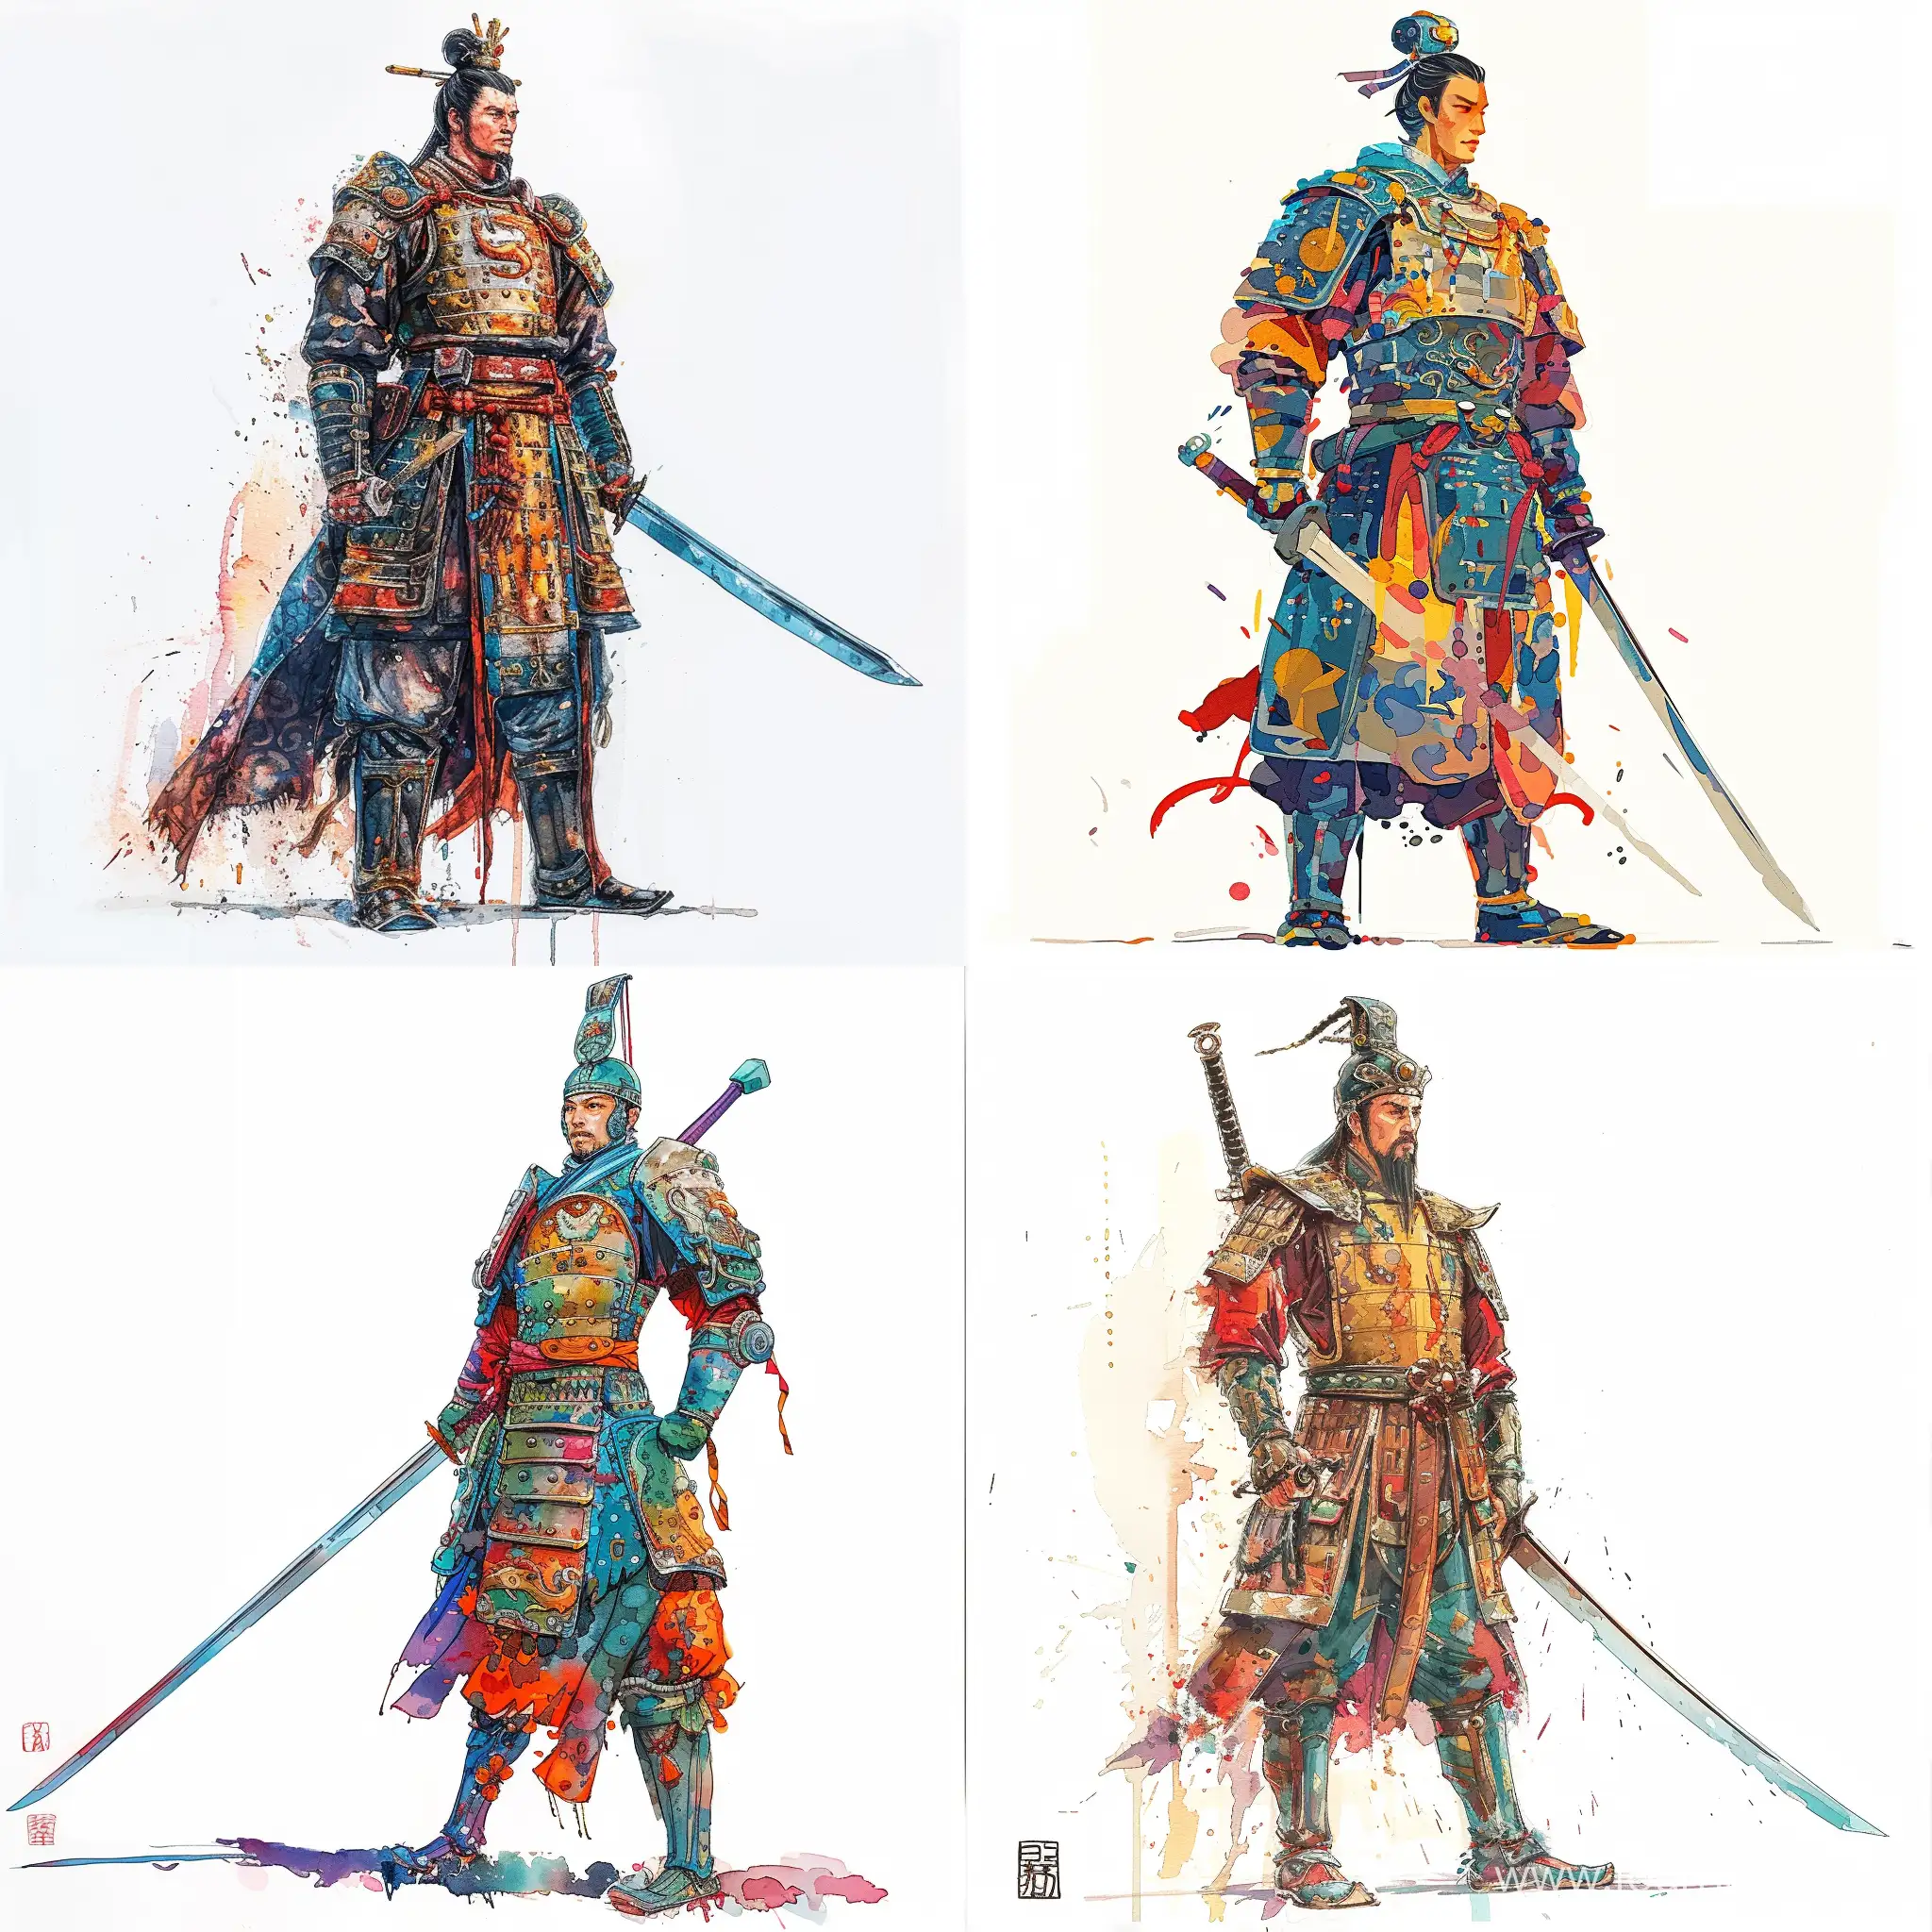 Stylized-Ancient-Chinese-Warrior-Holding-Sword-in-Decorative-Watercolor